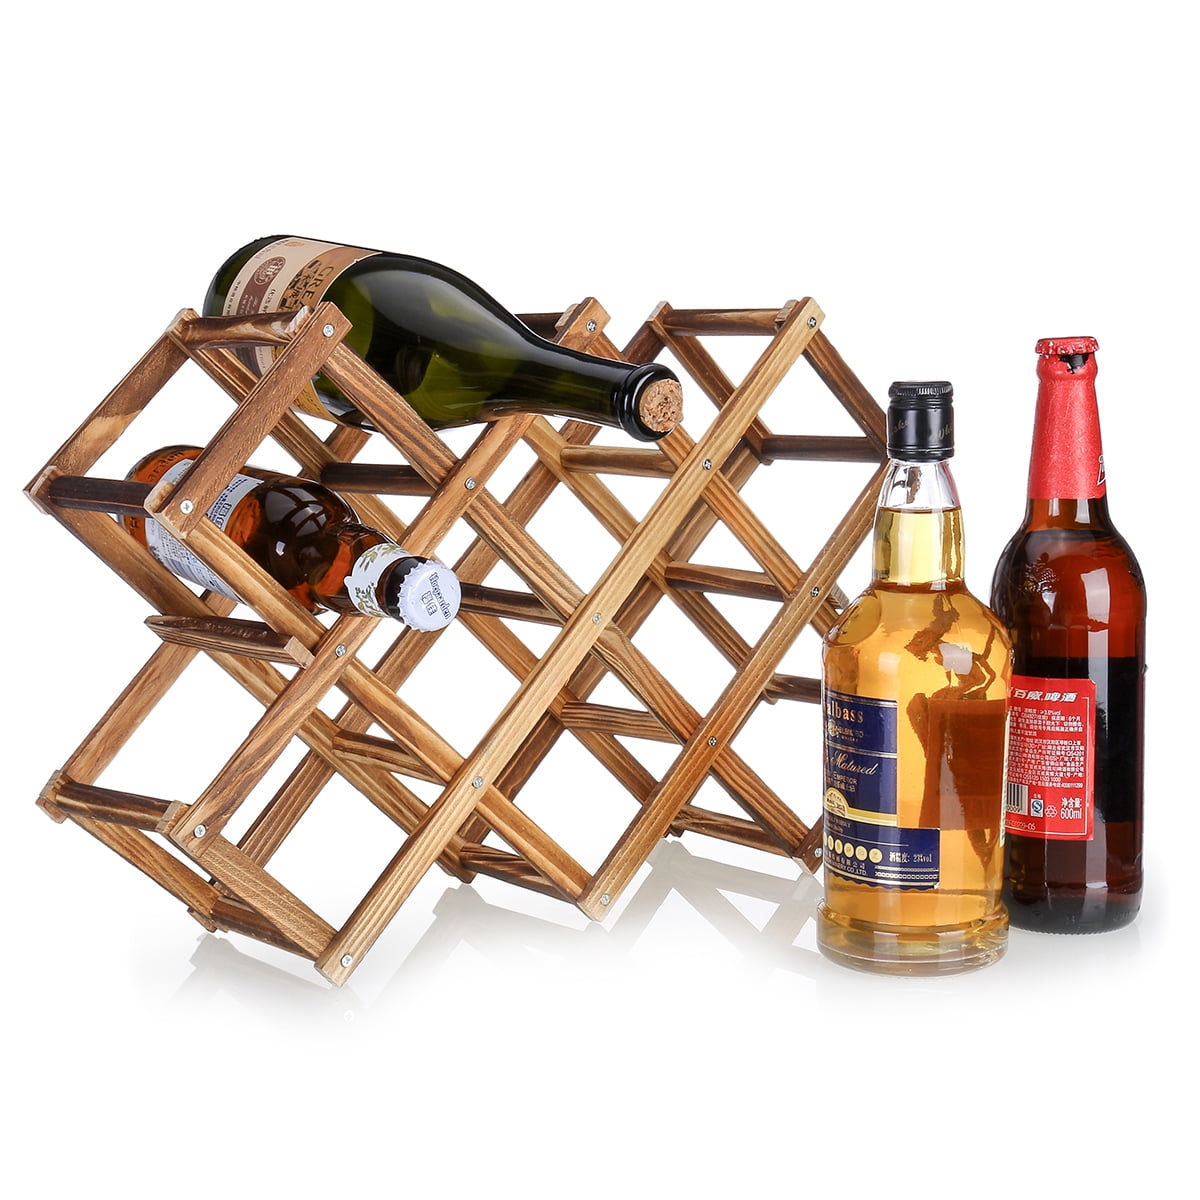 Wooden Wine Rack Small Wine Bottle Stand Holder Storage Free Standing Folding Wooden Racks Countertop Table Organizer 5 Slot Carbonized Wood 